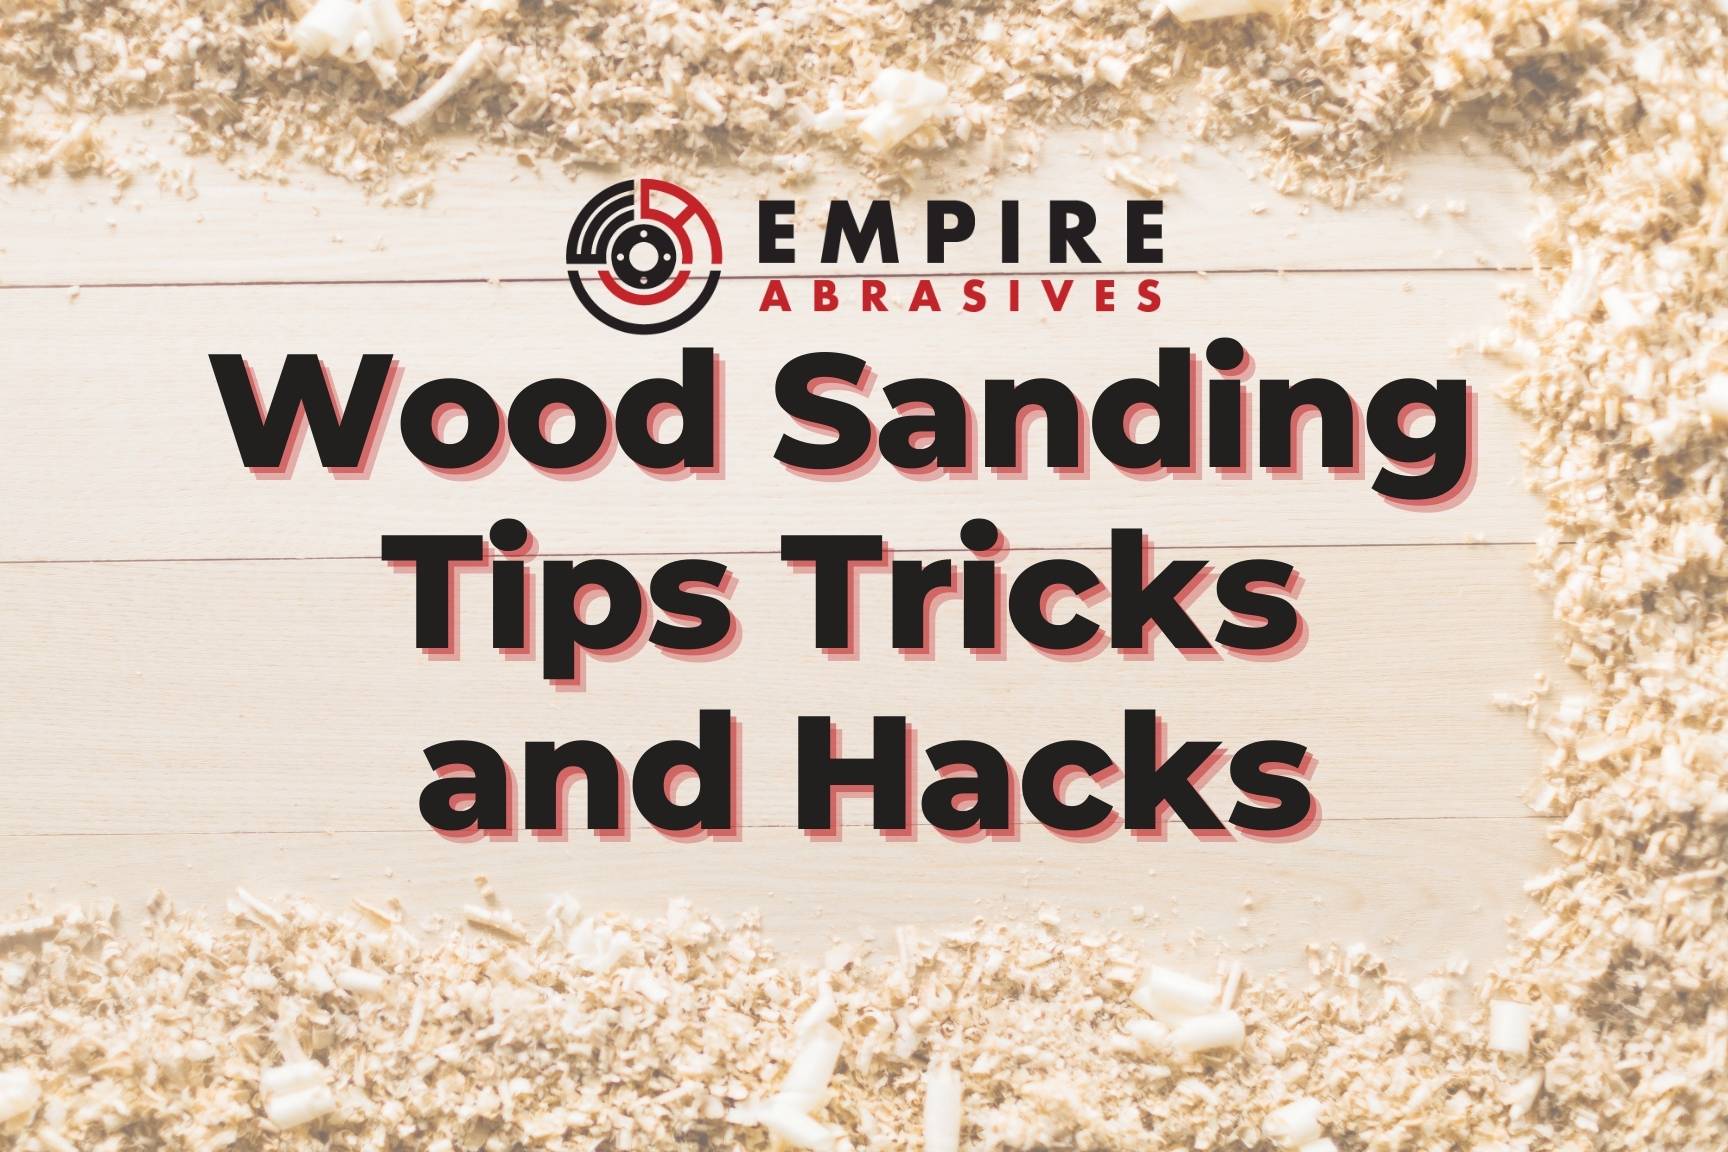 11 Wood Sanding Tips Tricks and Hacks to Save Time and Money - Empire  Abrasives